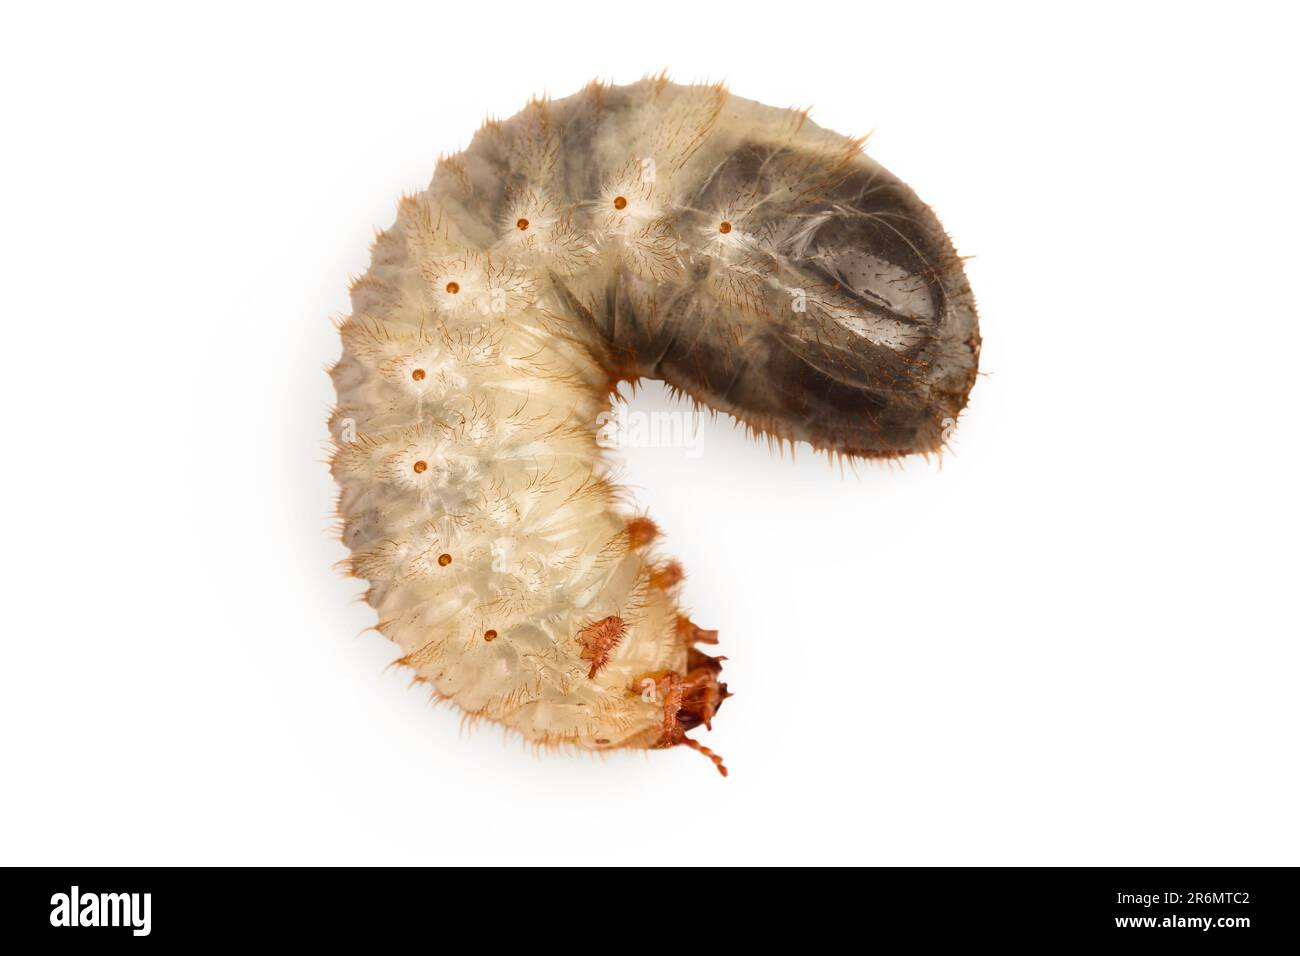 Larva of a may beetle isolated on a white background. Larva of cockchafer Stock Photo